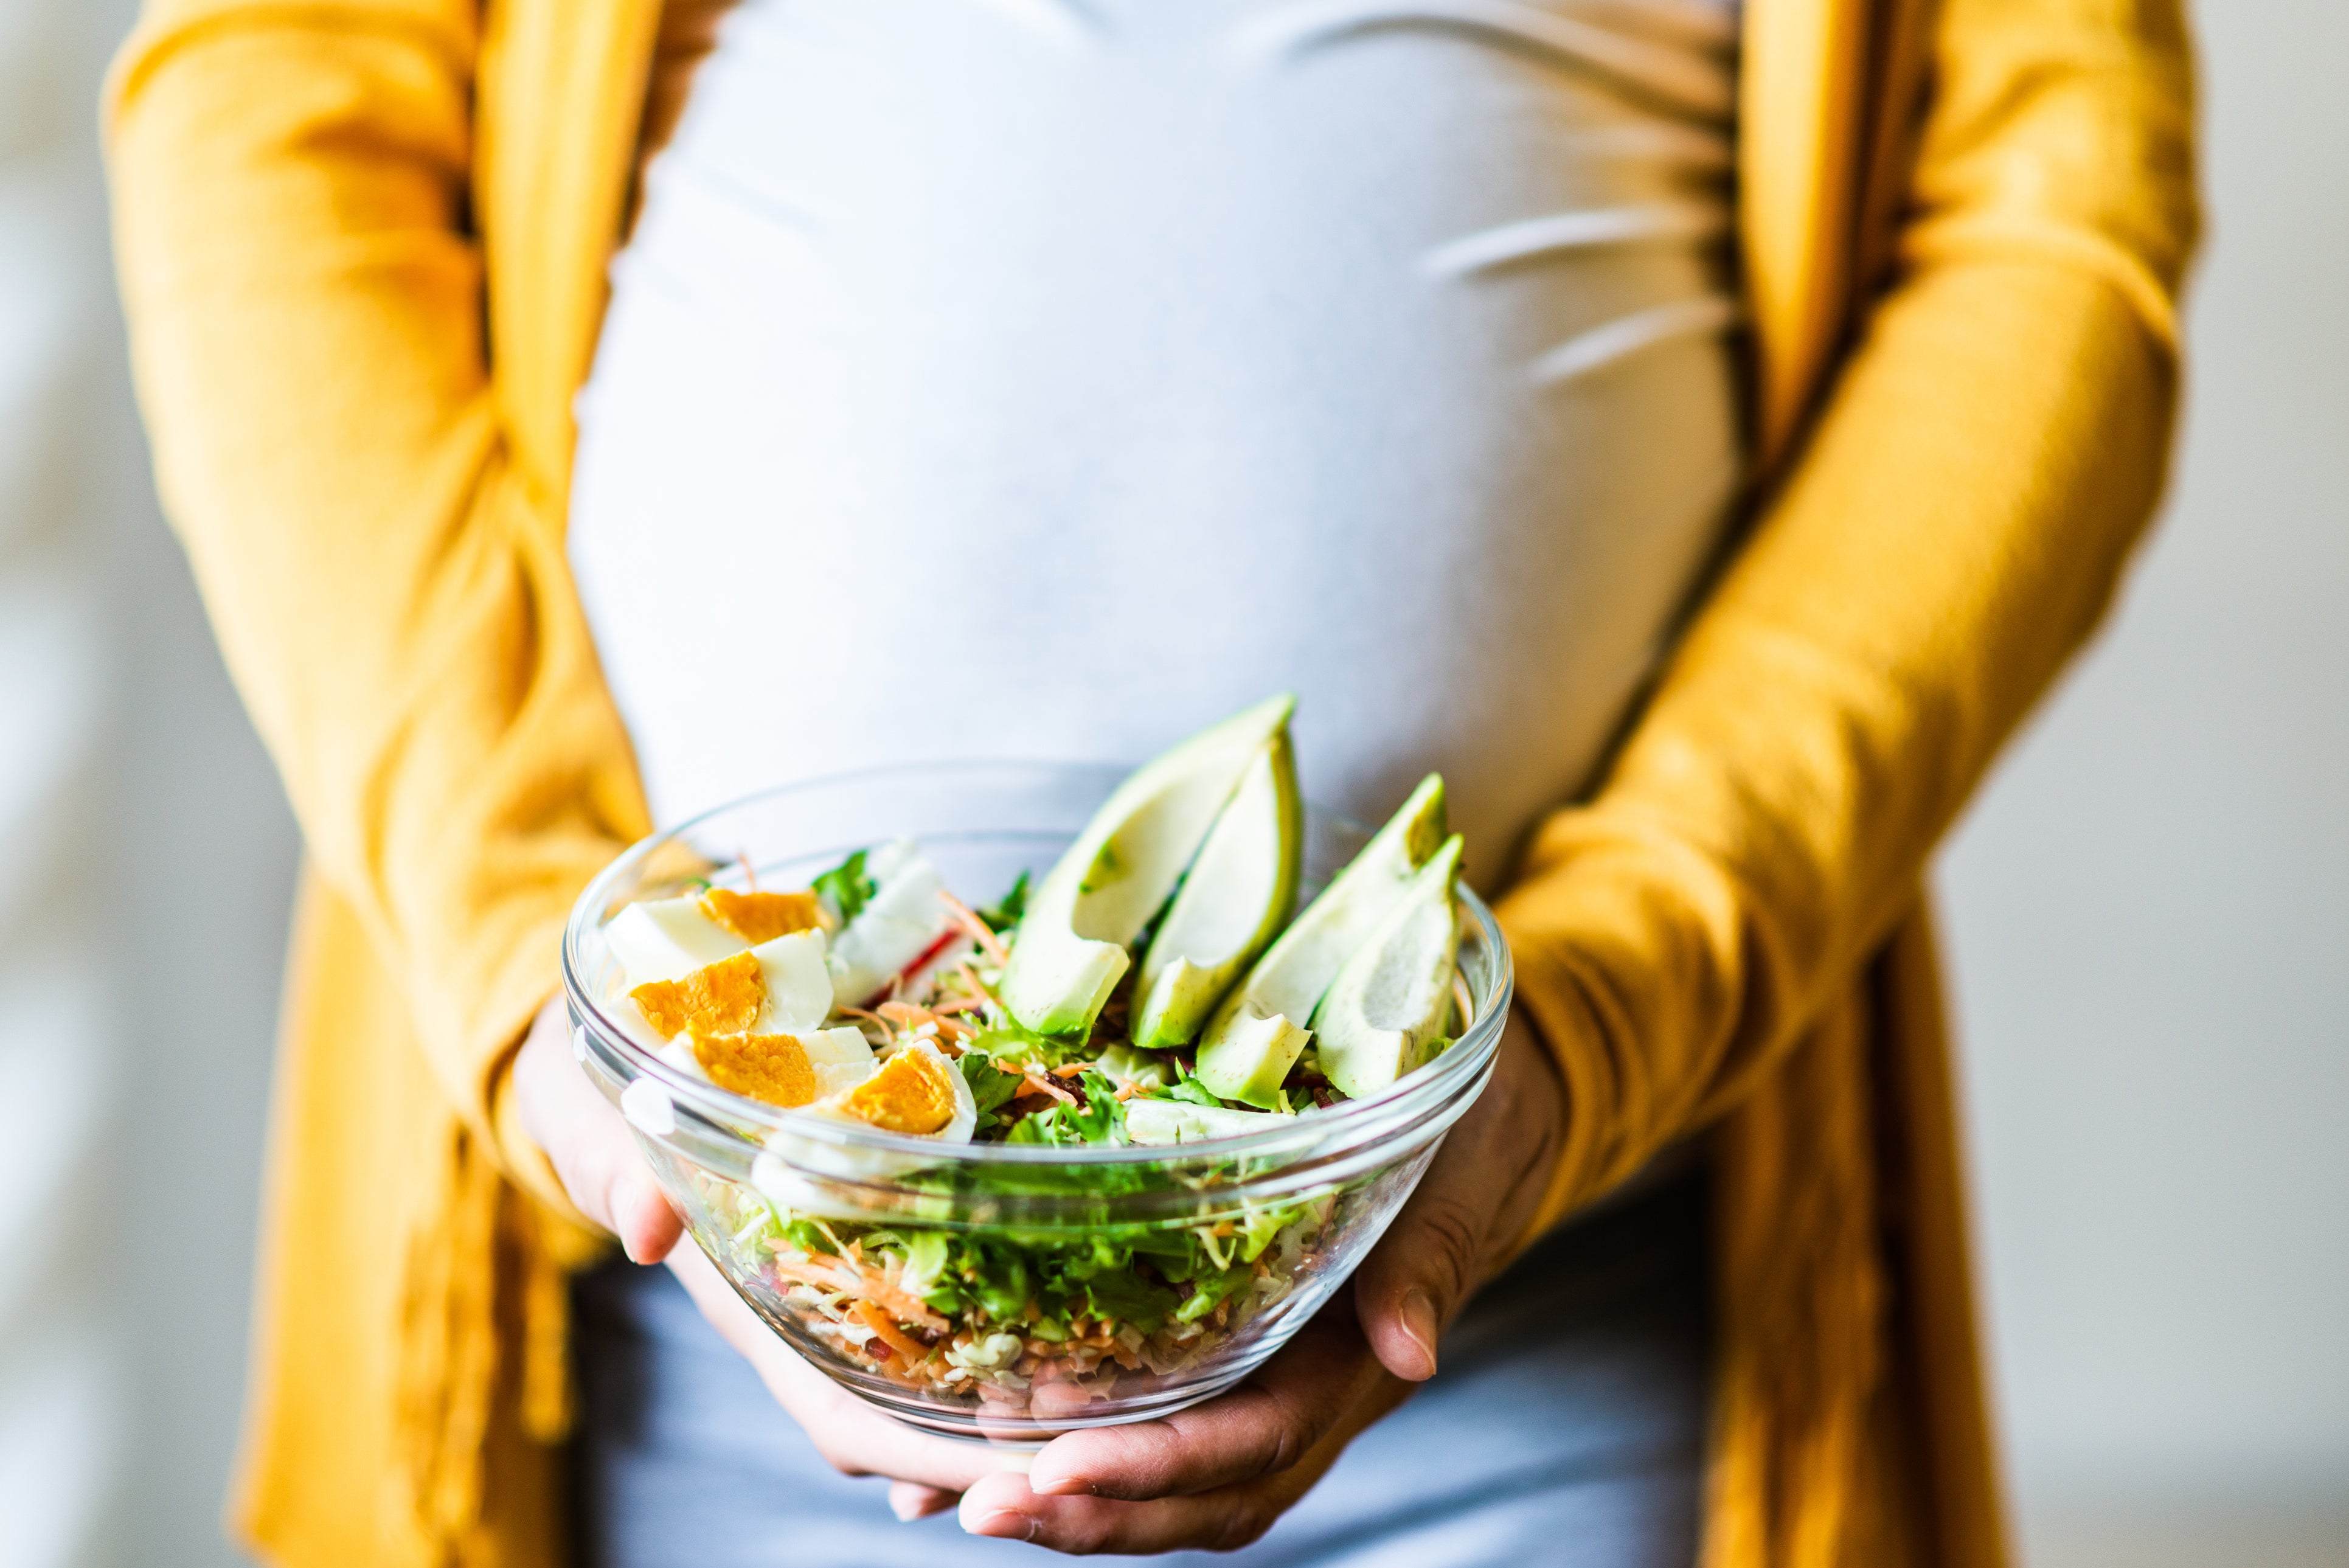 Eating Right Before and During Pregnancy